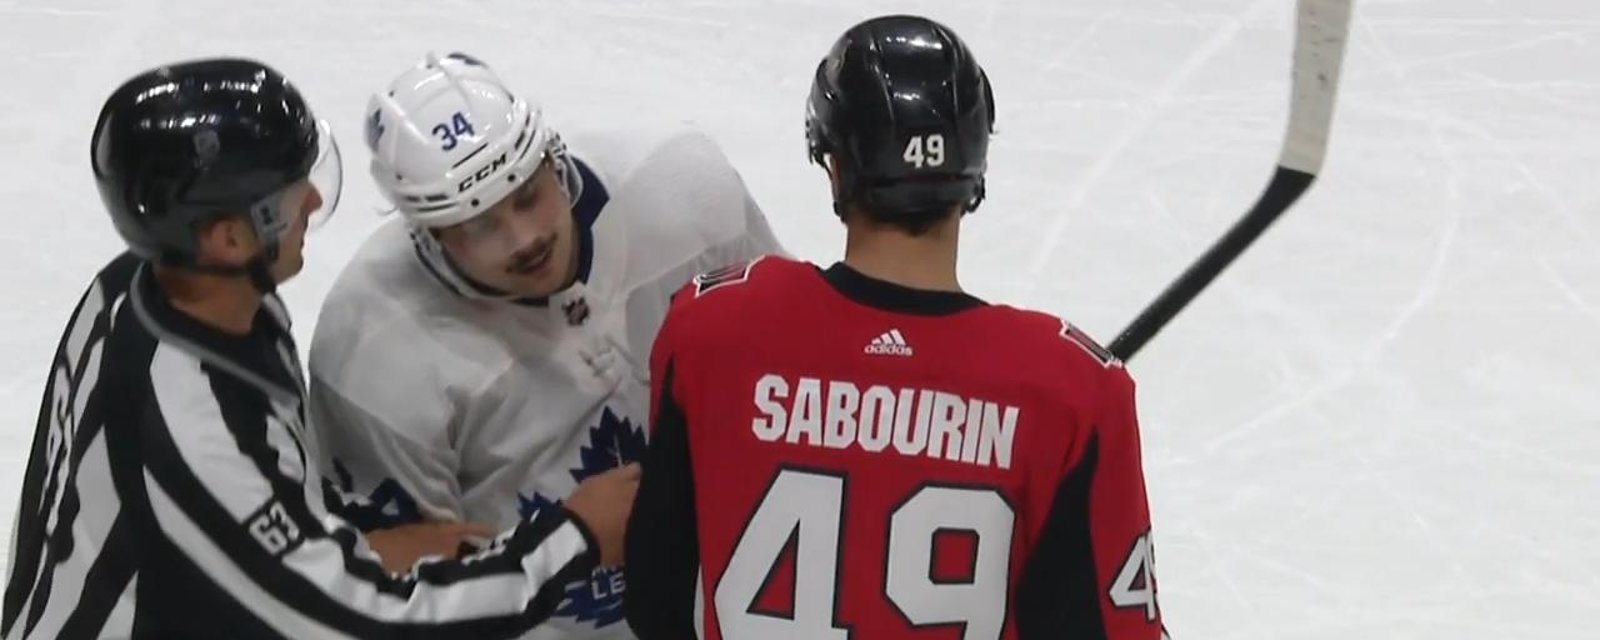 Matthews reacts to Scott “Who the heck are you” Sabourin’s goal! 